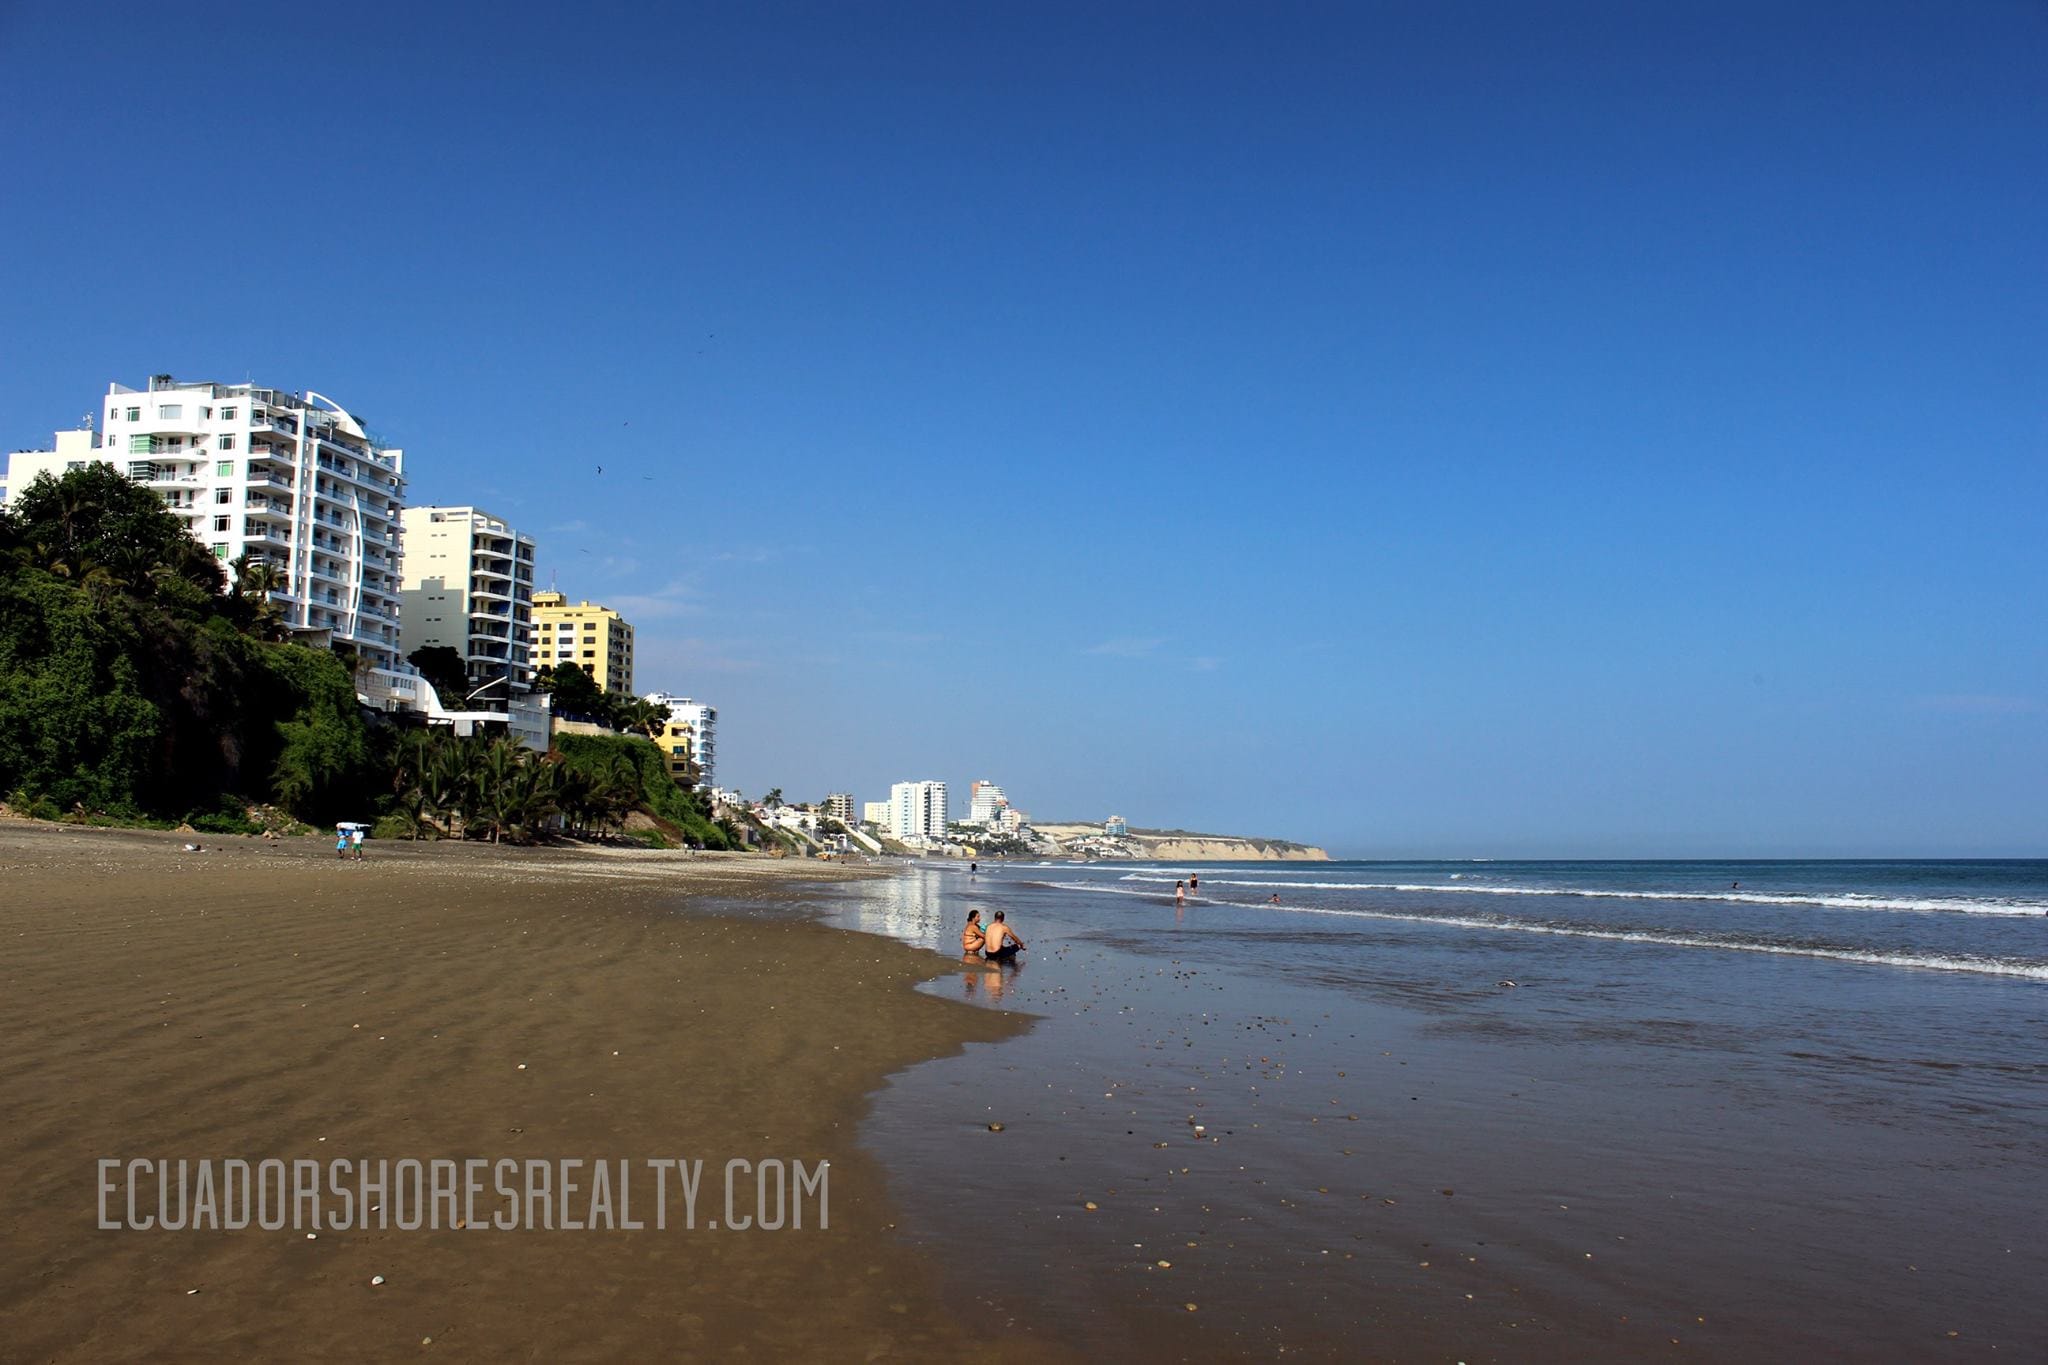 Manta, Ecuador – The Largest and Fastest Growing Coastal City in the Country!